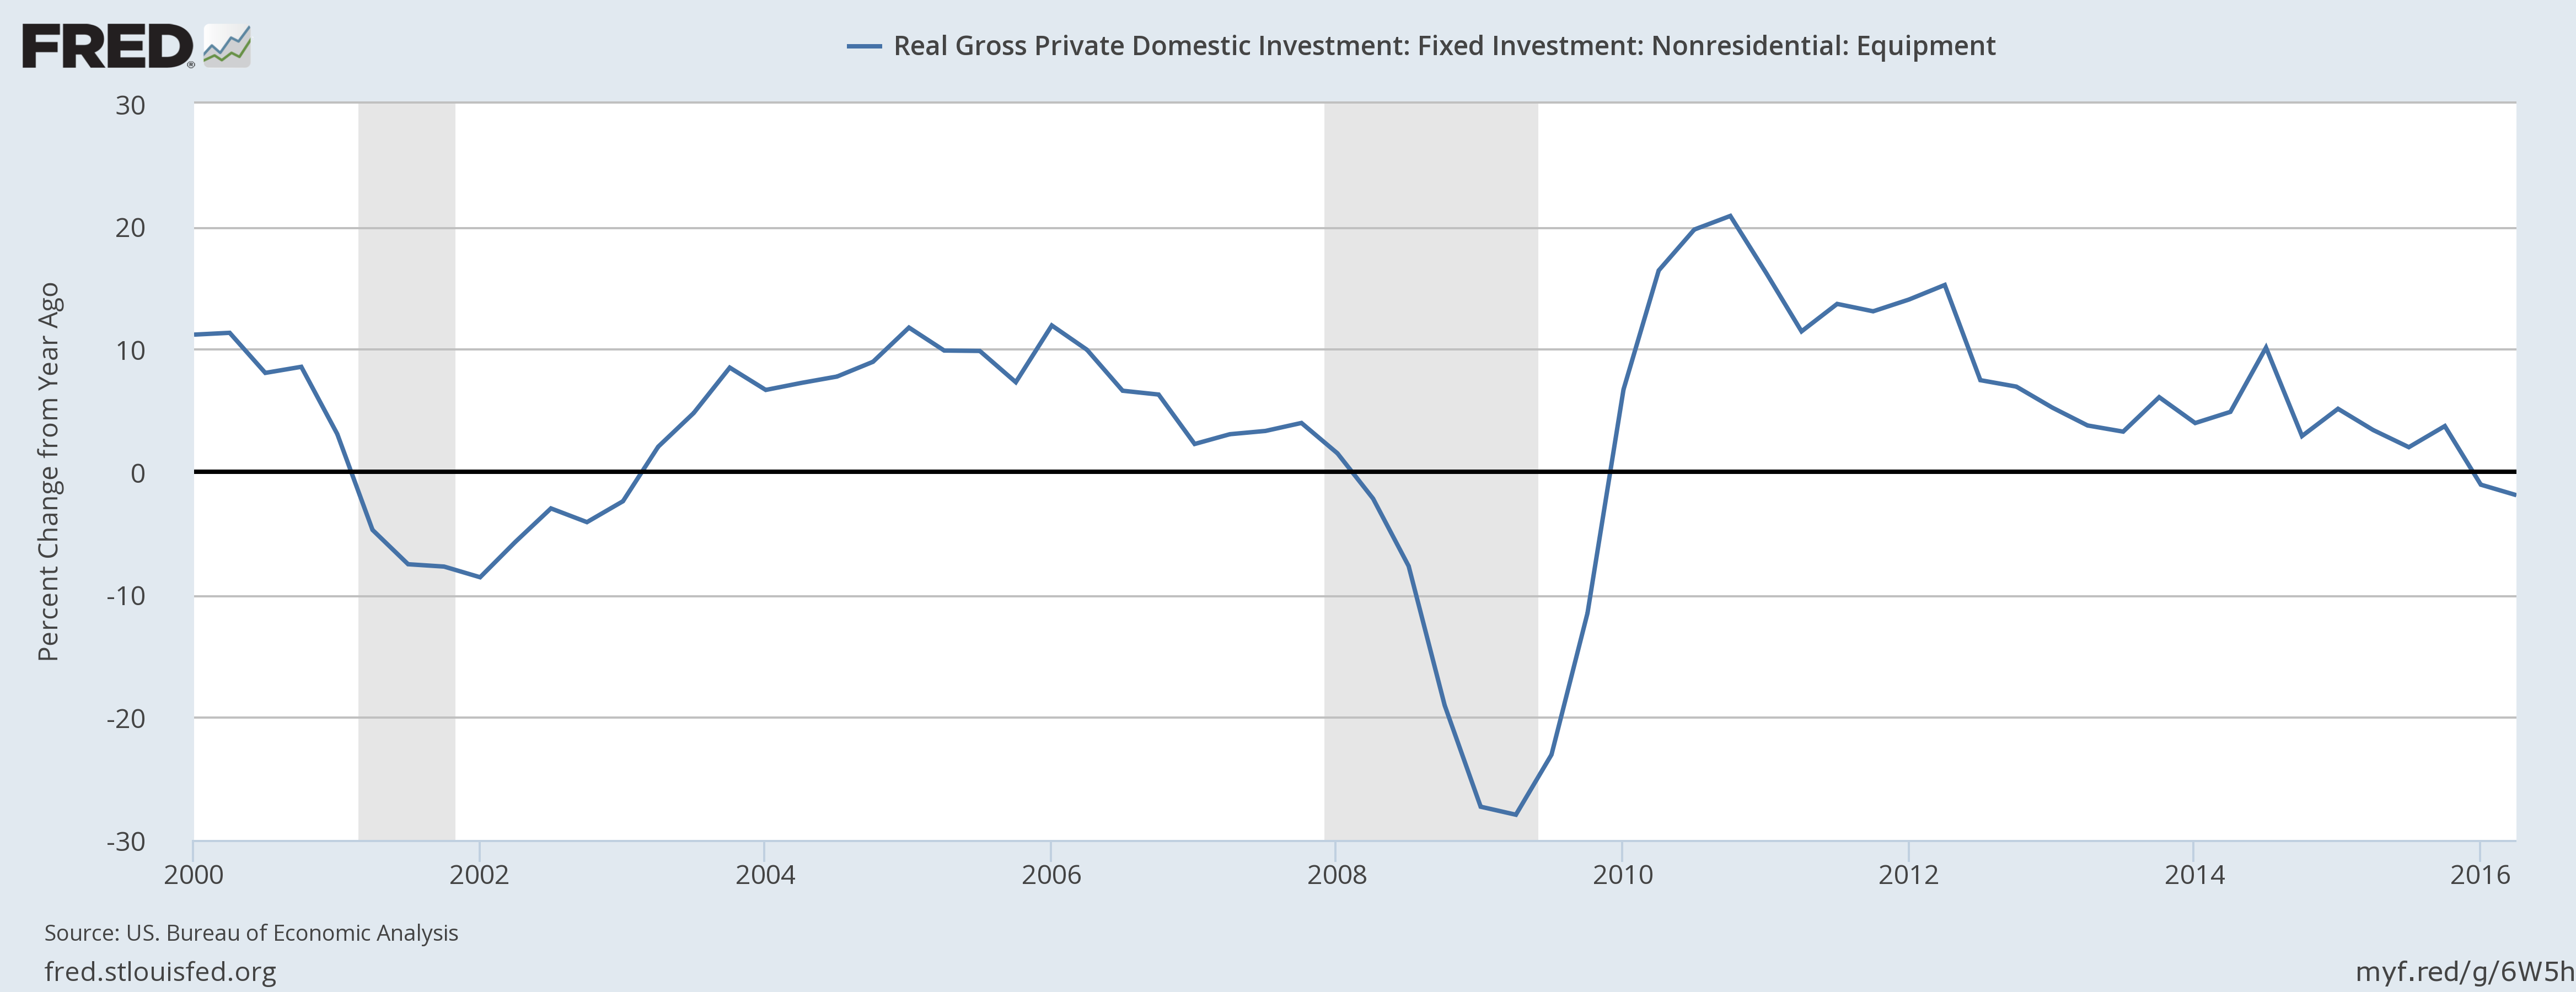 Real Gross Private Domestic Investment 2000-2016